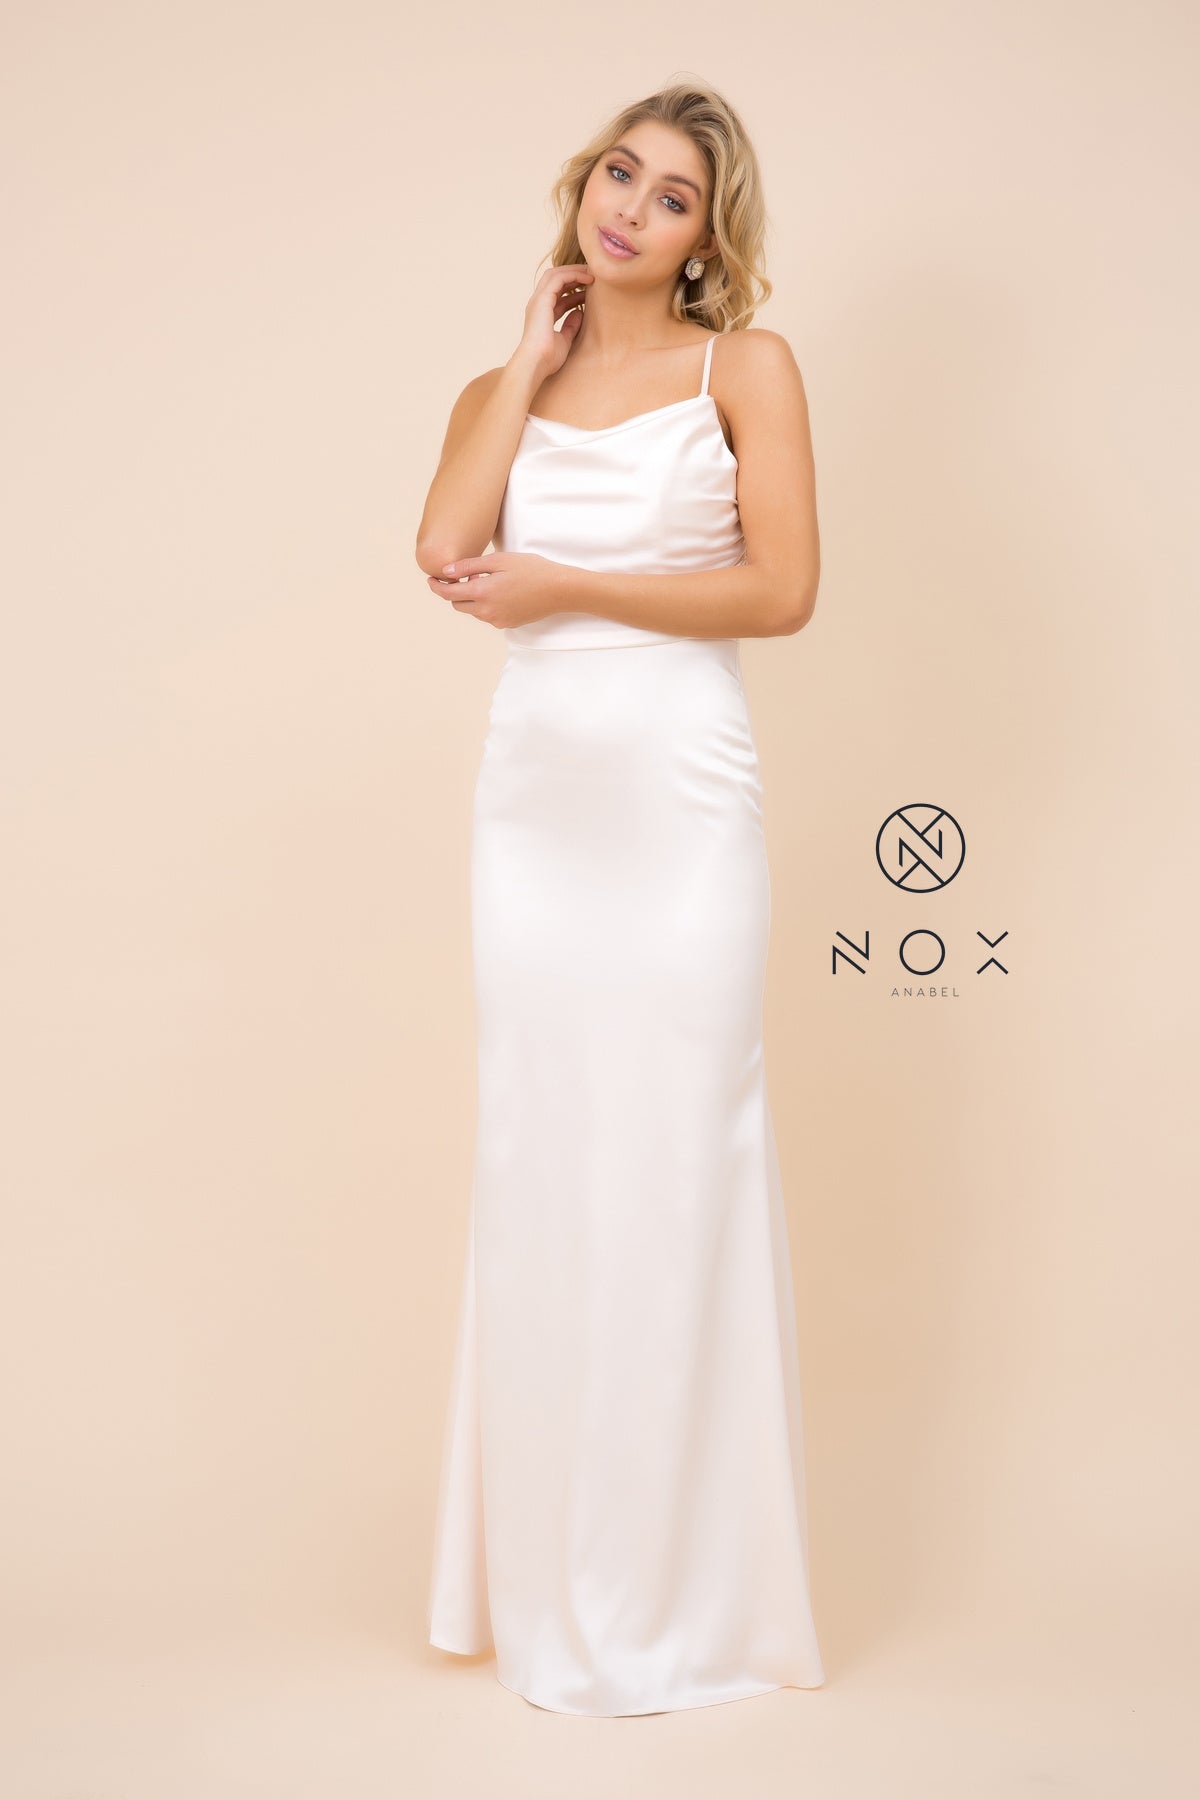 MyFashion.com - OPEN BACK SATIN GOWN WITH ADJUSTABLE SPAGHETTI STRAPS (C302) - Nox Anabel promdress eveningdress fashion partydress weddingdress 
 gown homecoming promgown weddinggown 